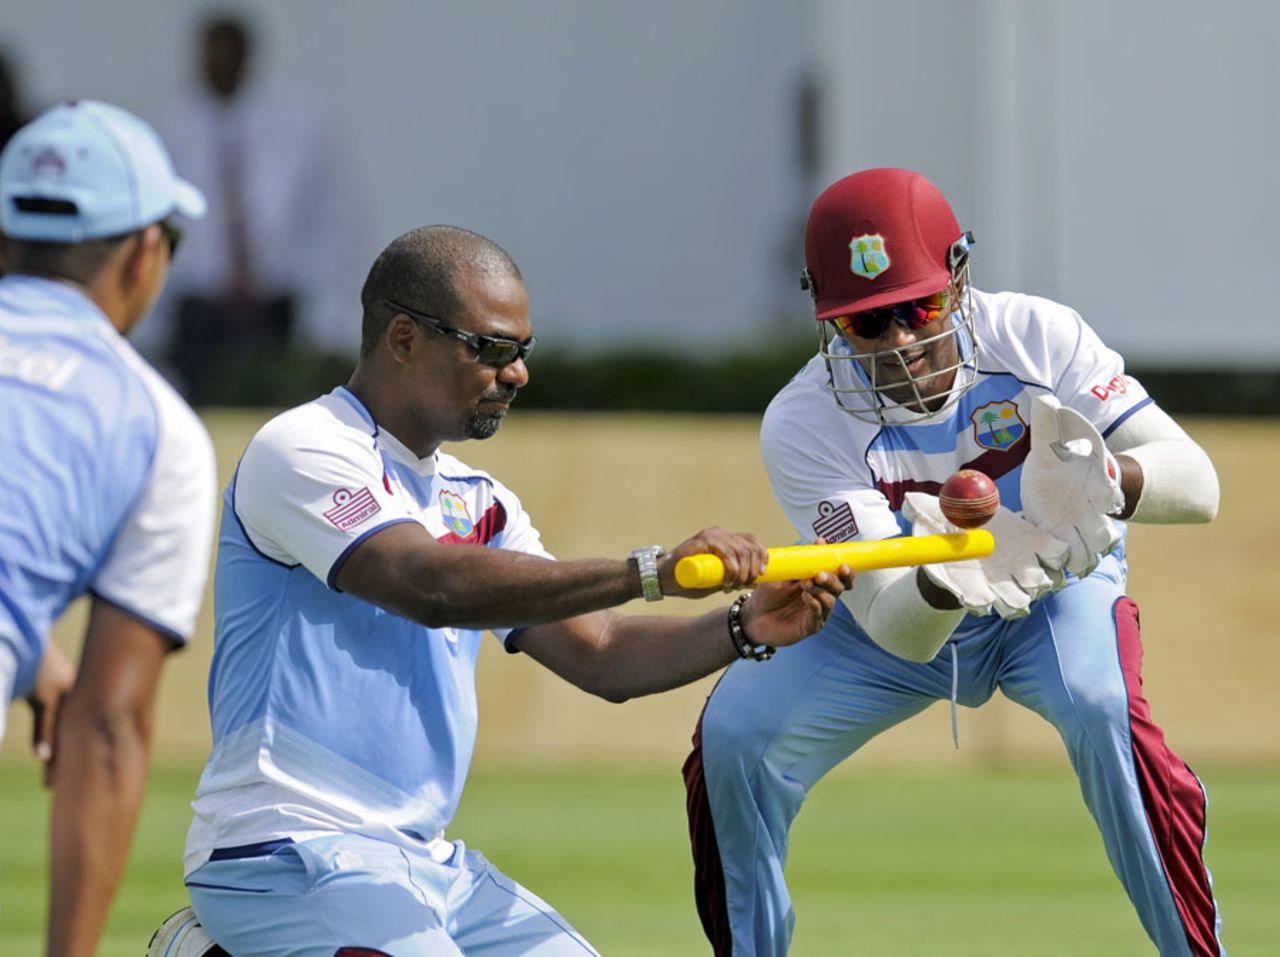 Denesh Ramdin gets some catching practice during a training session, Gros Islet, St Lucia, September 11, 2014